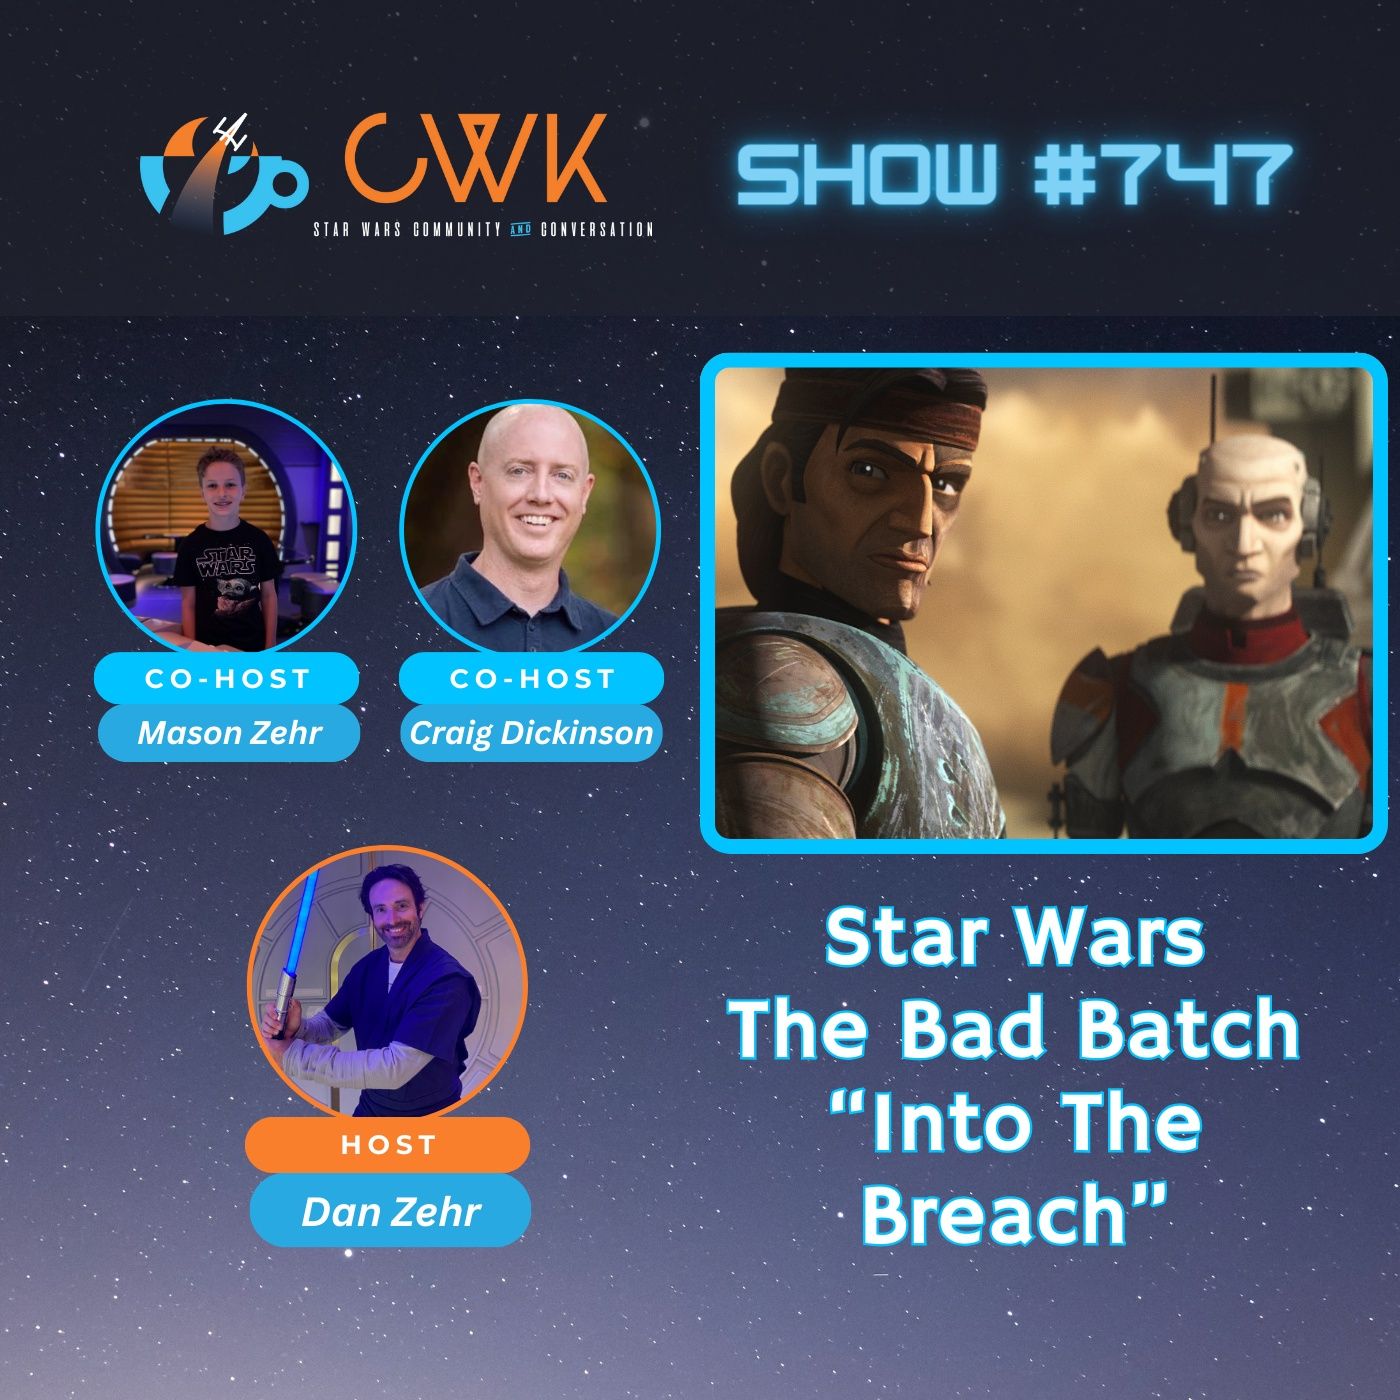 CWK Show #747: The Bad Batch- “Into The Breach”